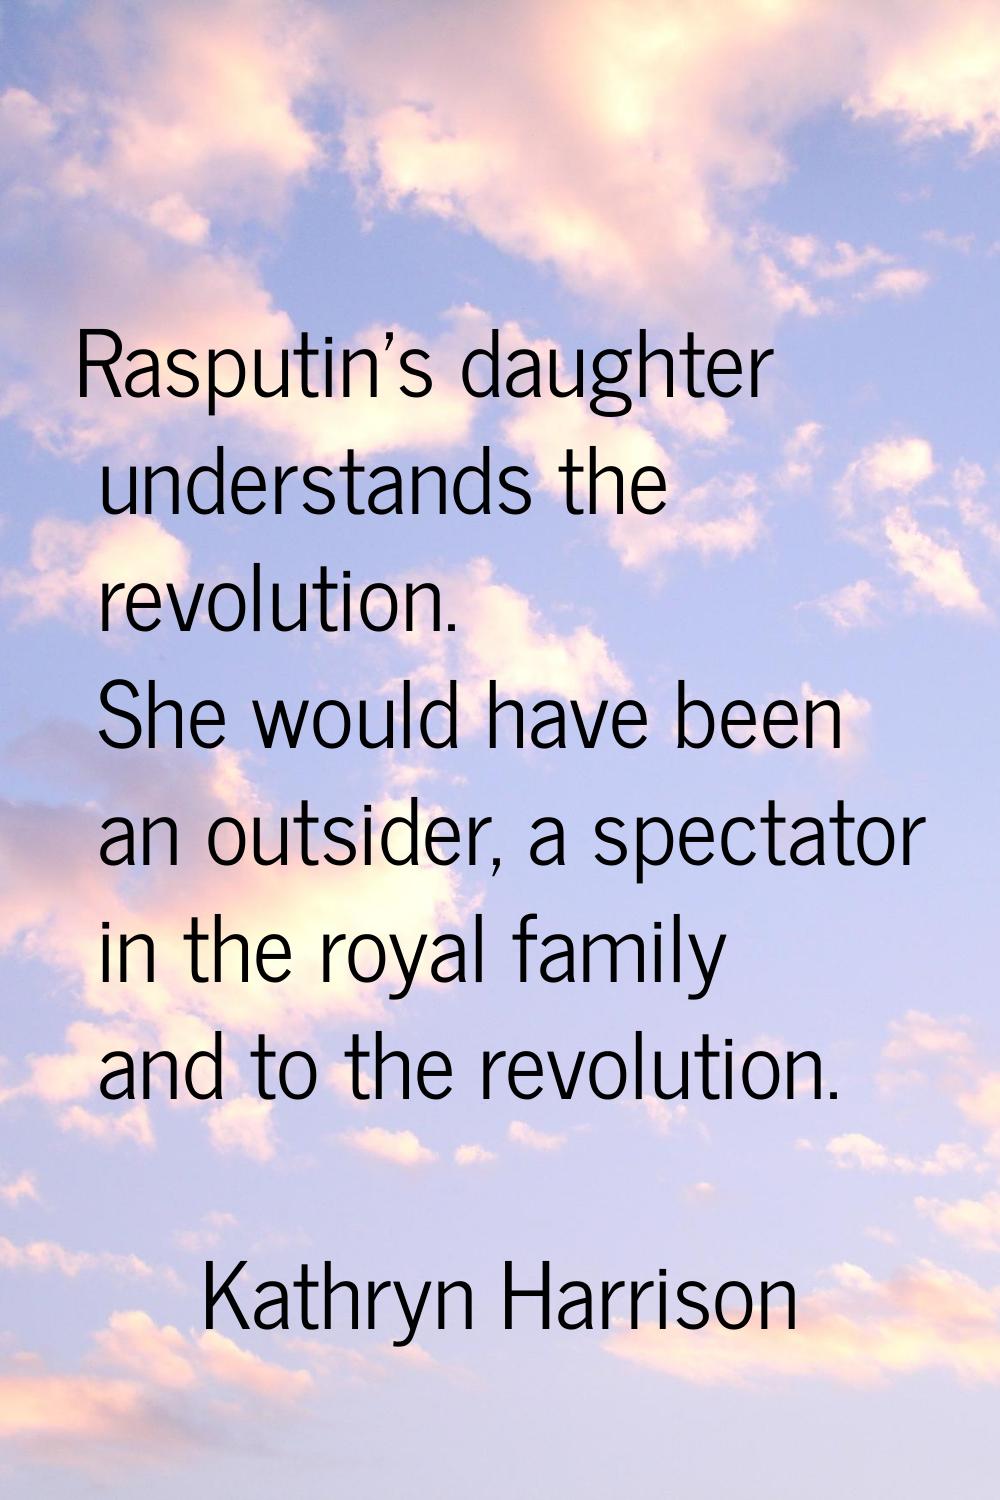 Rasputin's daughter understands the revolution. She would have been an outsider, a spectator in the